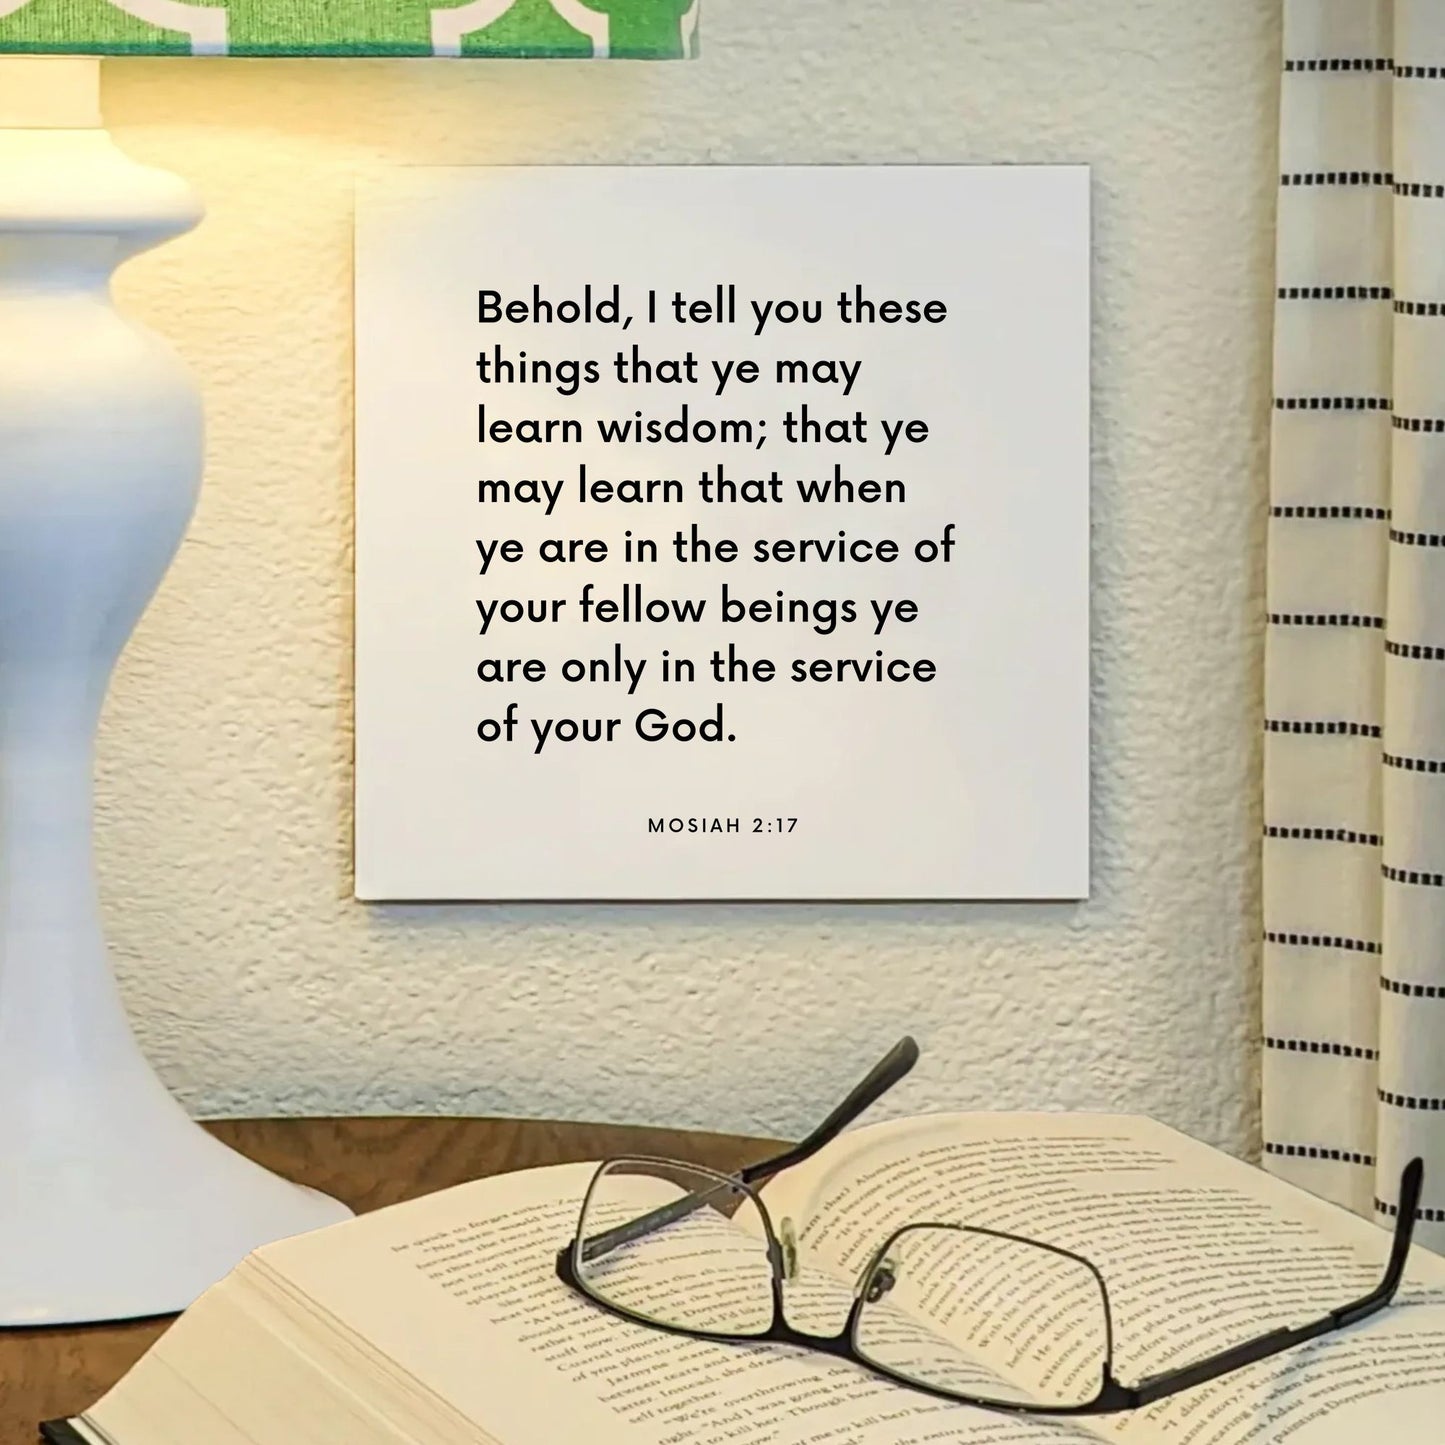 Lamp mouting of the scripture tile for Mosiah 2:17 - "When ye are in the service of your fellow beings"